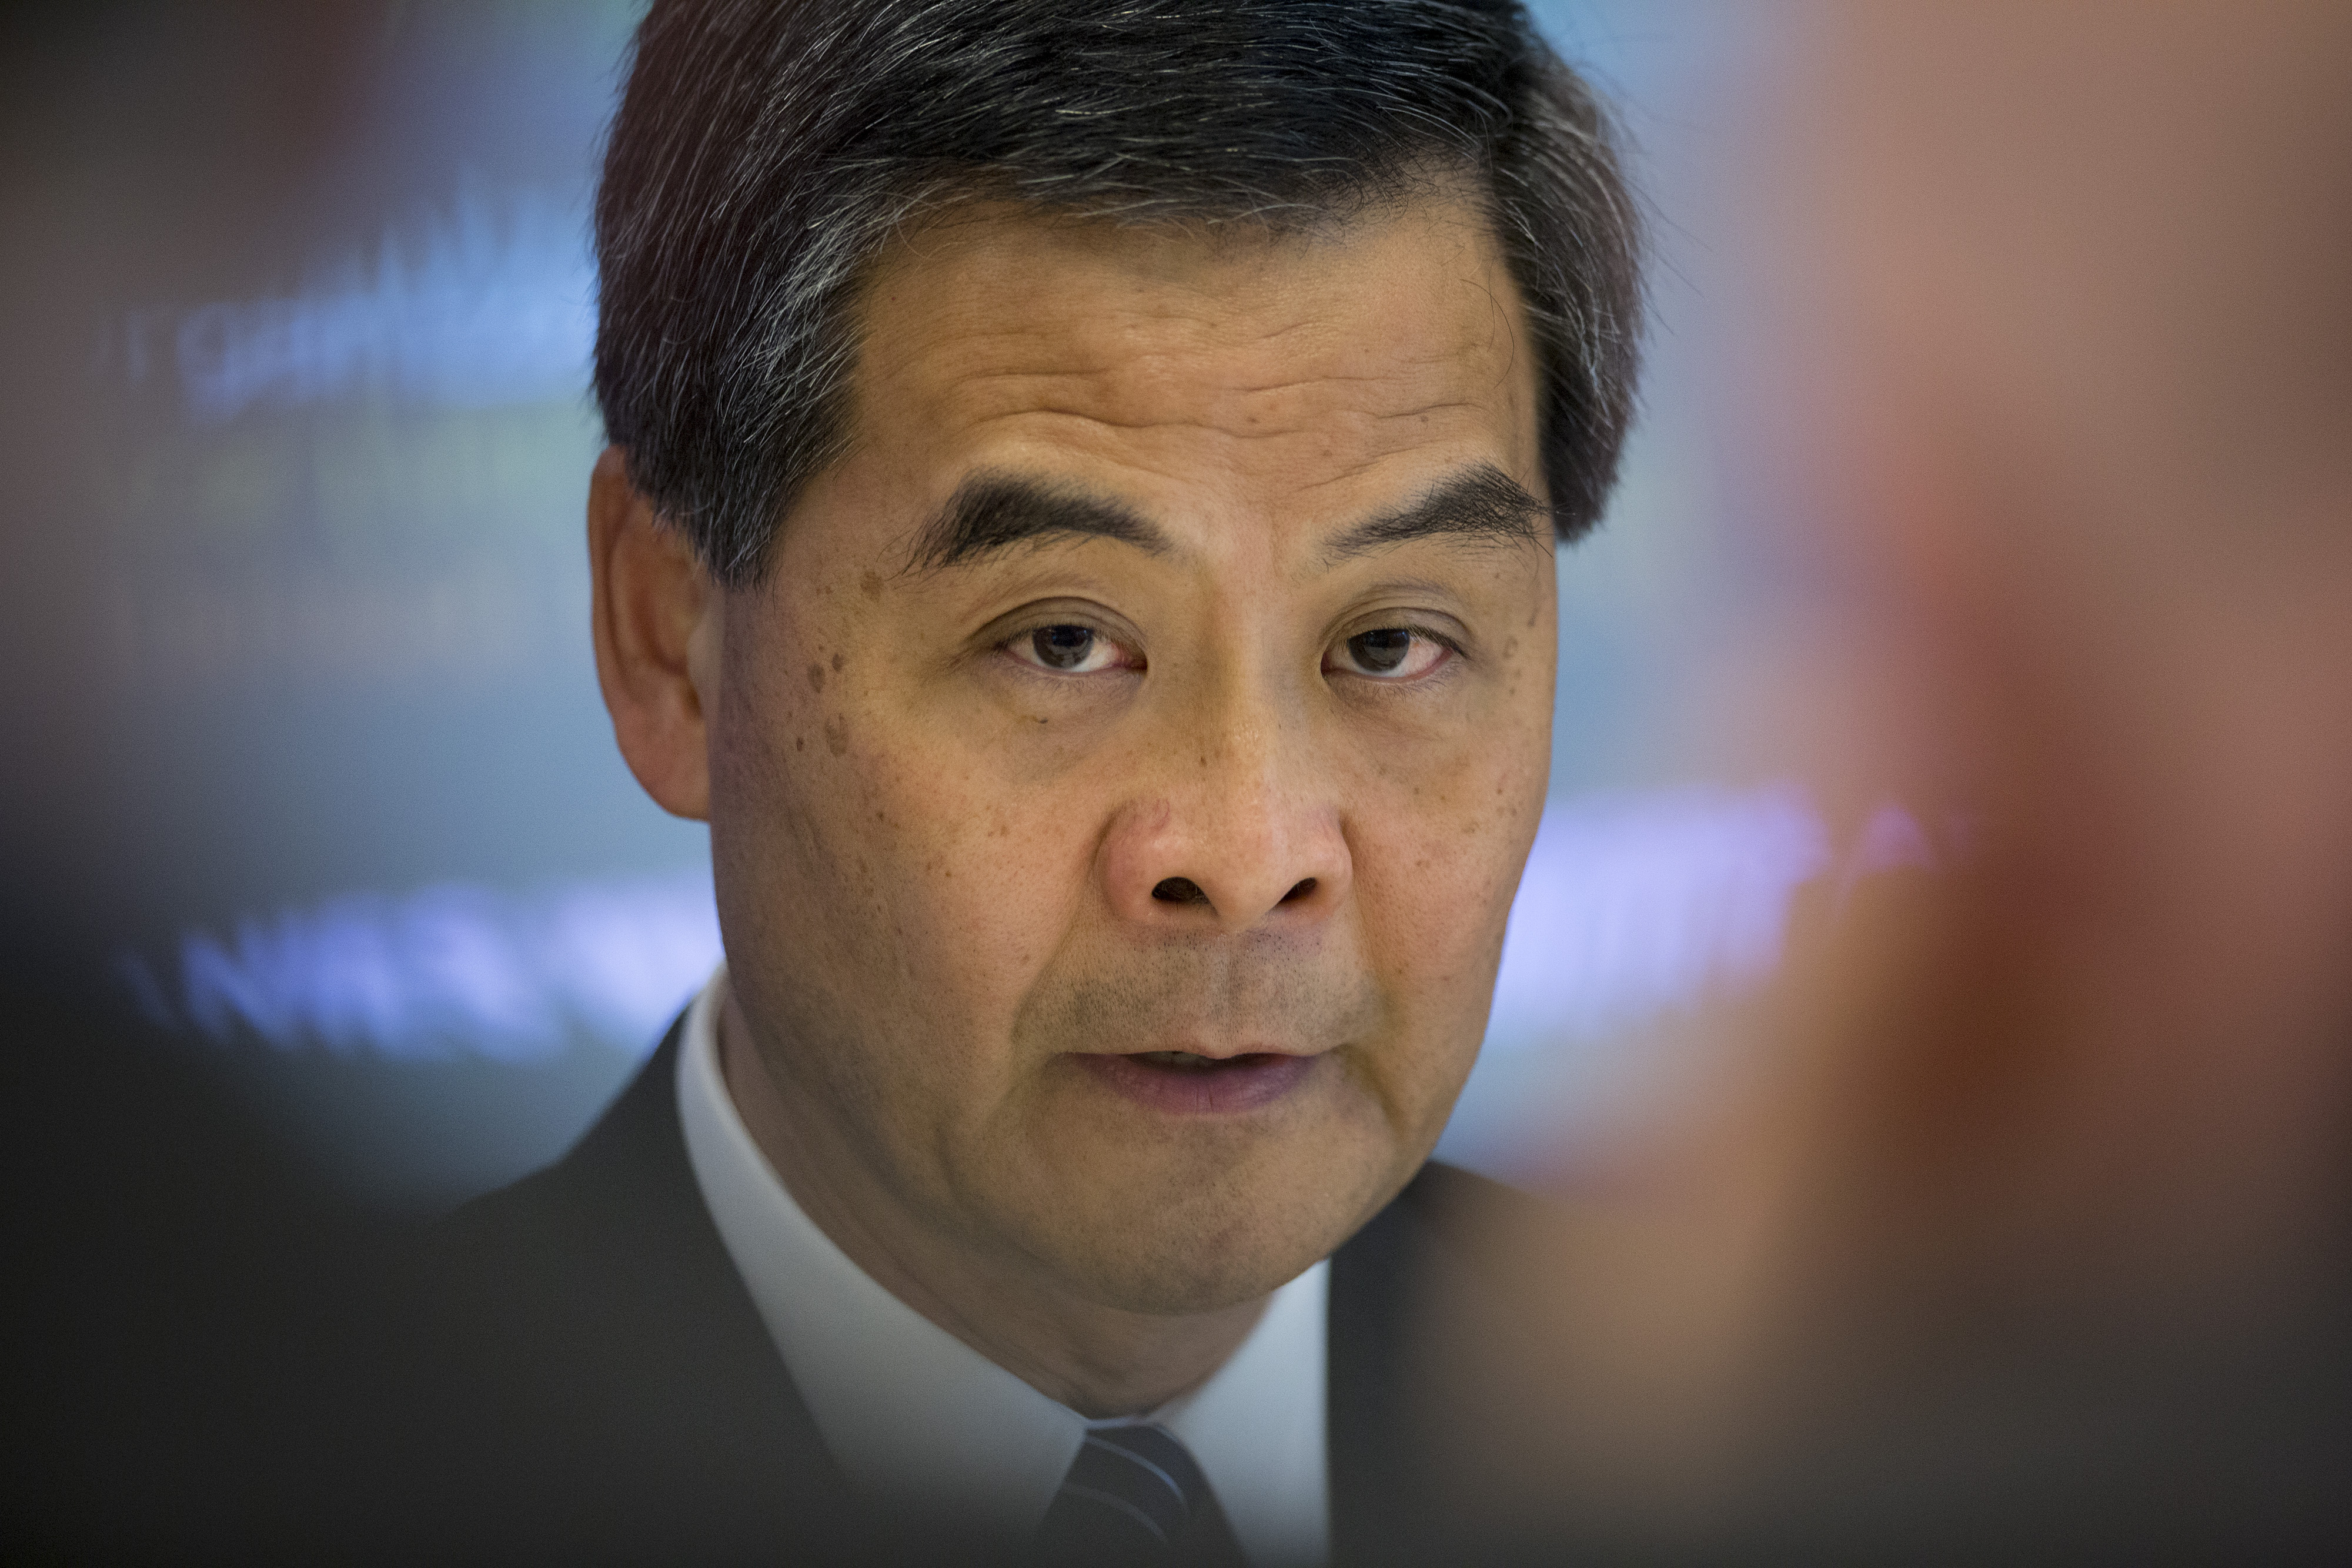 Leung Chun-ying, Hong Kong's chief executive, speaks during an interview in New York, U.S., on Wednesday, June 12, 2013. (Bloomberg—Bloomberg via Getty Images)